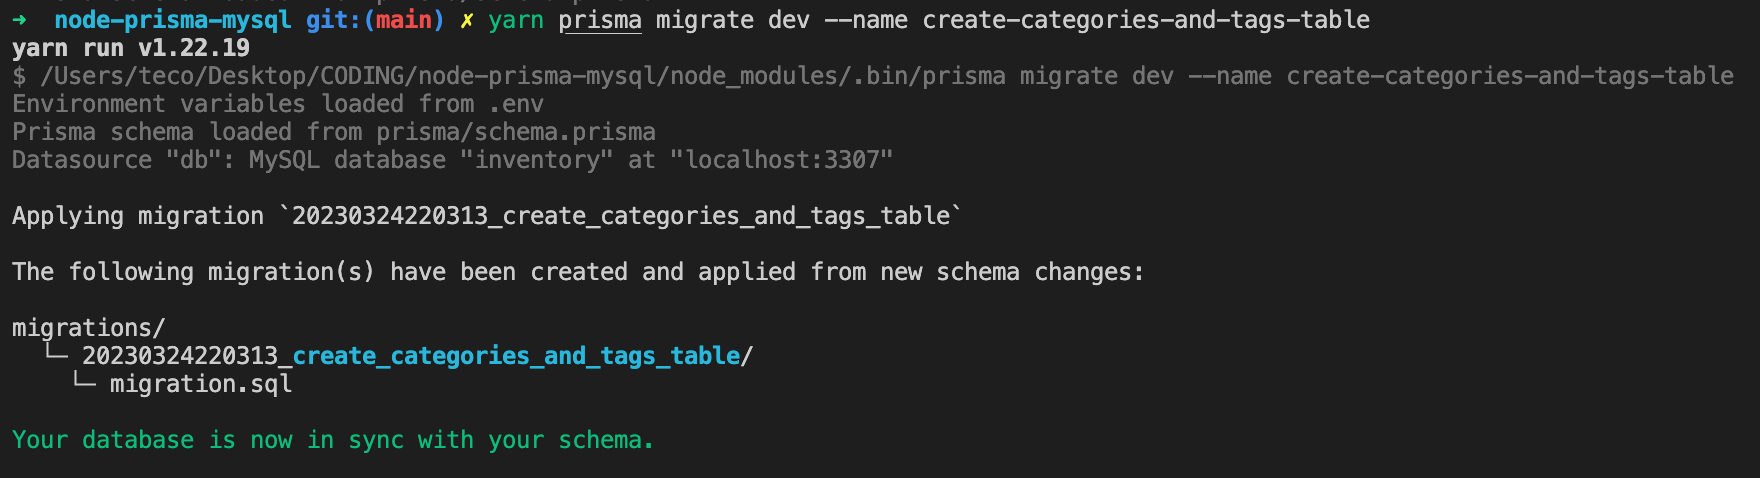 Run the migration to create tables in the database.